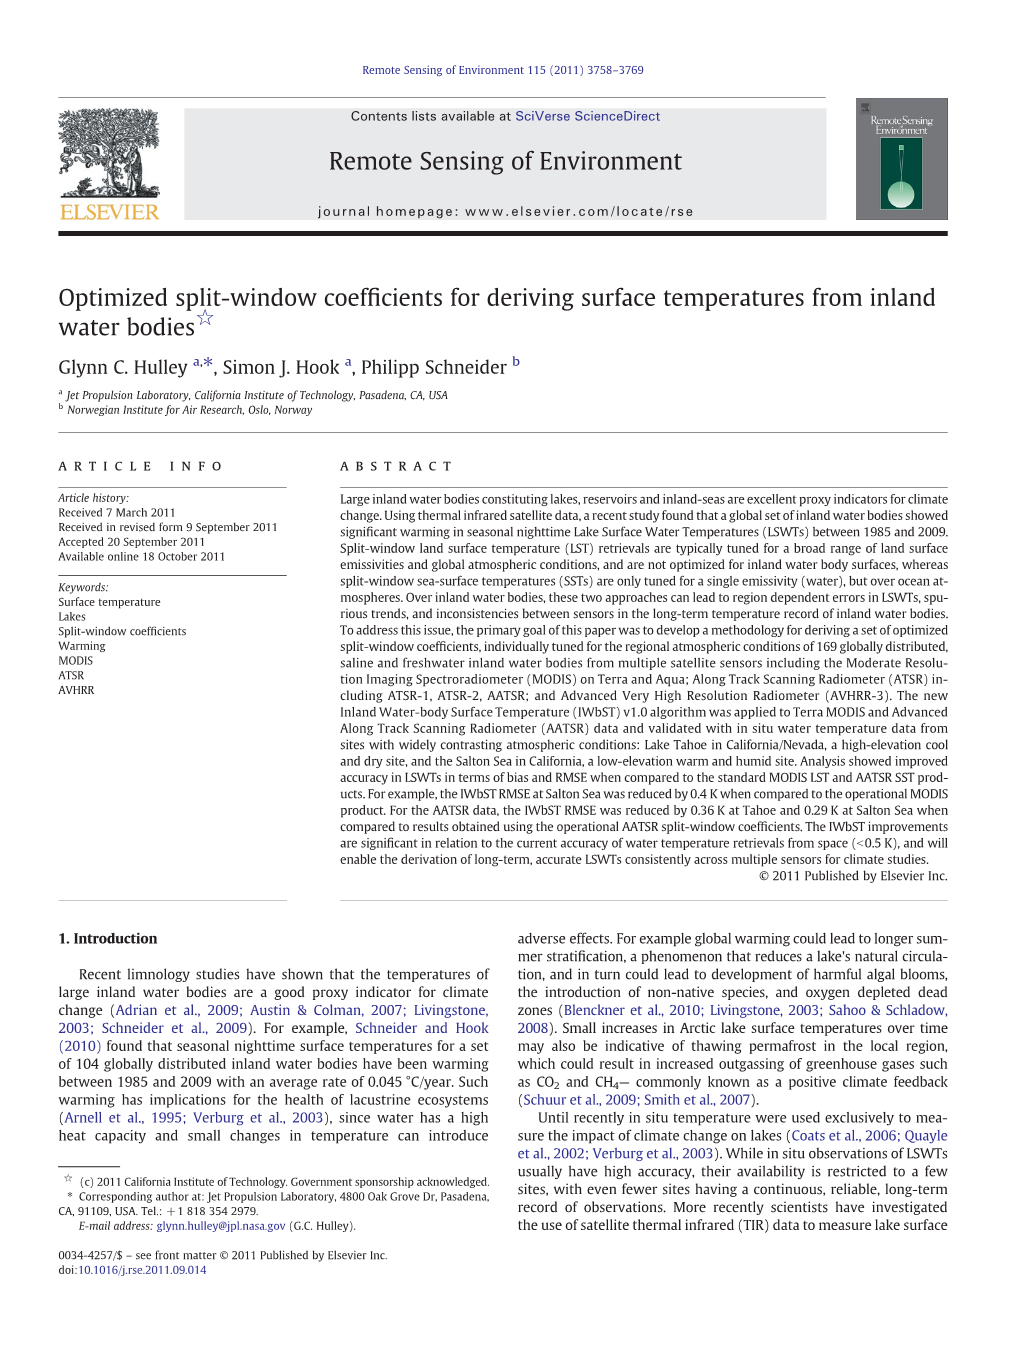 Optimized Split-Window Coefficients for Deriving Surface Temperatures From